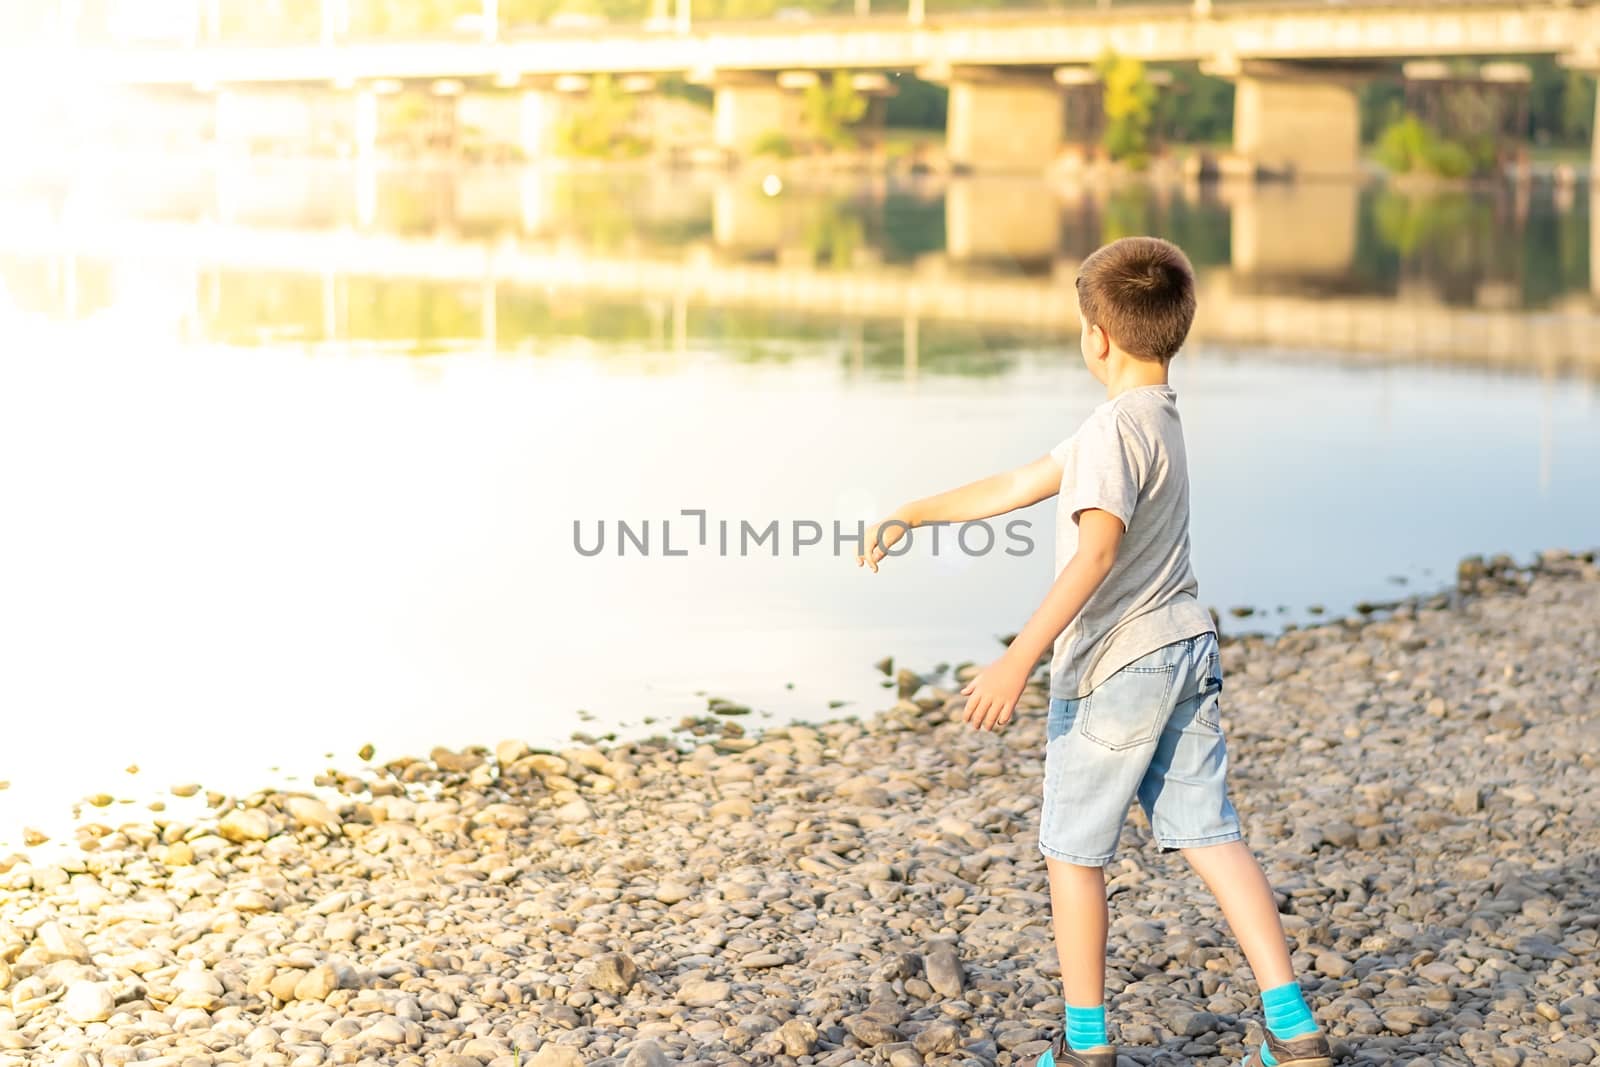 a child, a teenager, on a stony shore throws stones into the river by jk3030